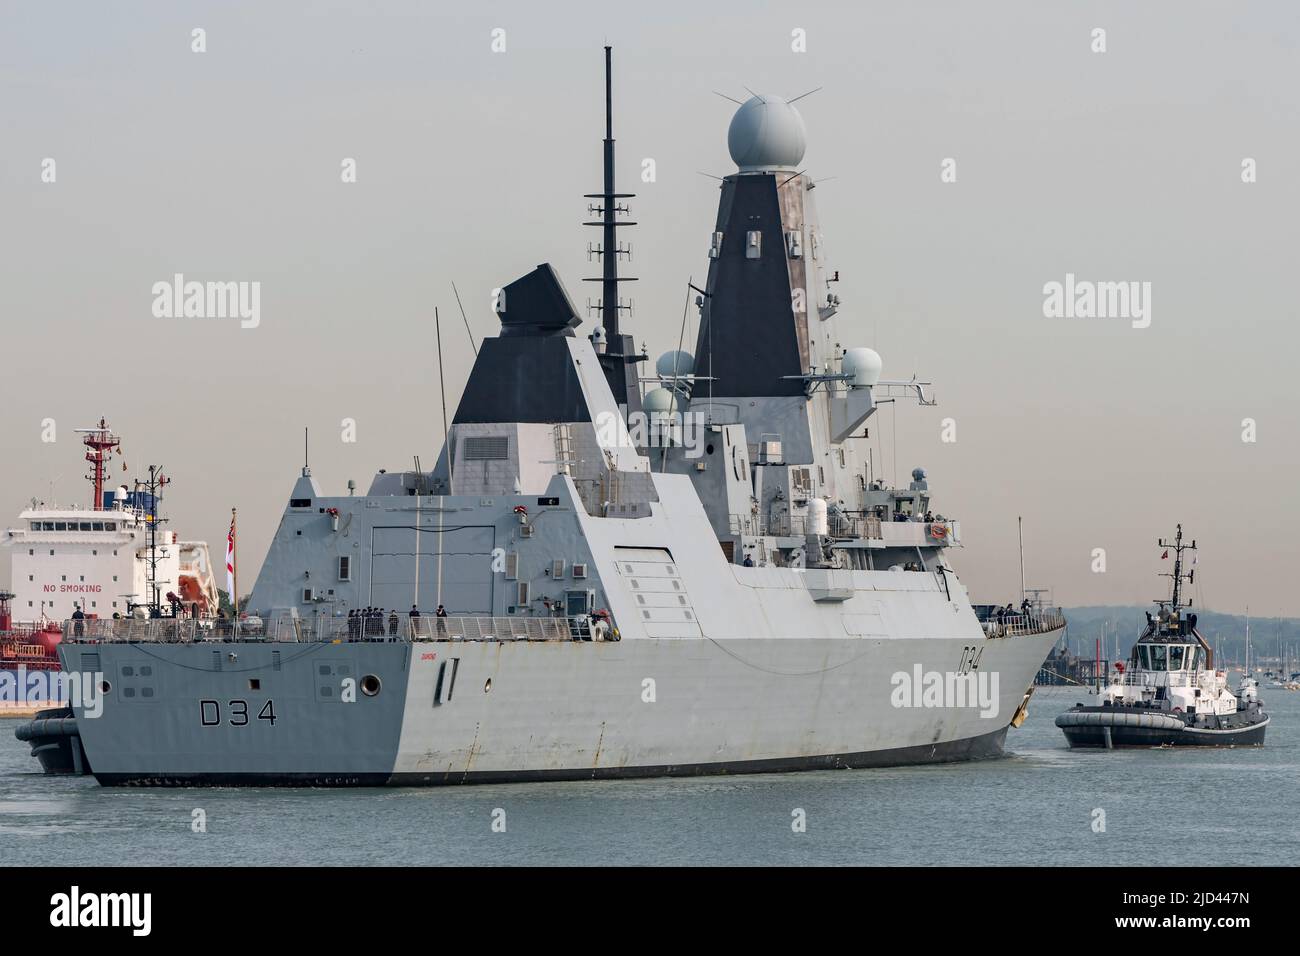 The Royal Navy Type 45 Daring Class air defence destroyer HMS Diamond (D34) returned to Portsmouth, UK on 17/6/22 after operational sea training. Stock Photo